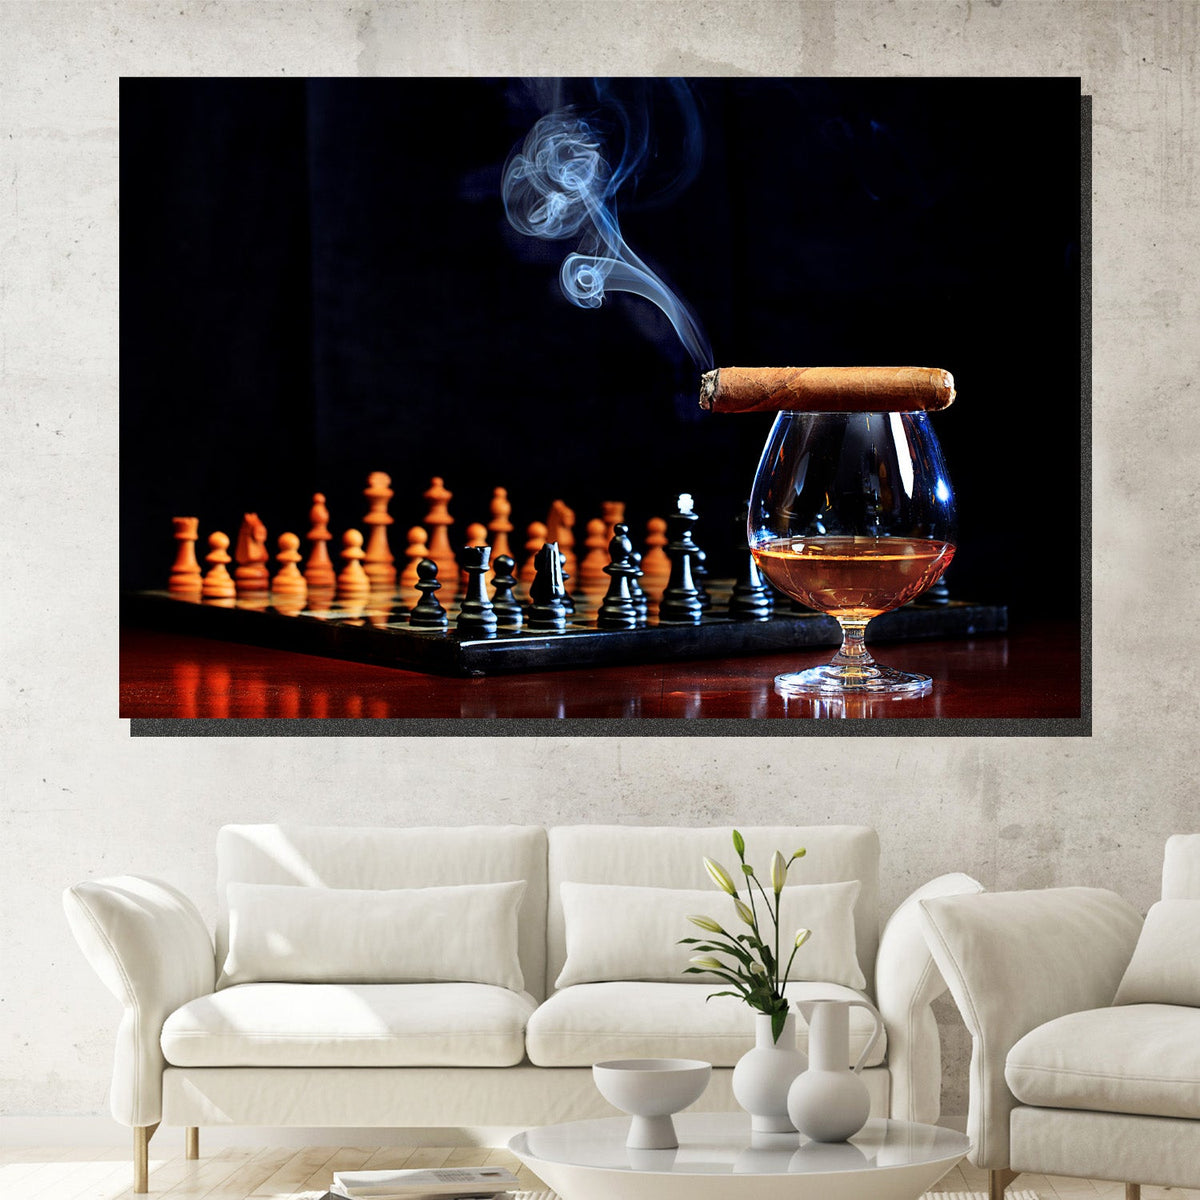 https://cdn.shopify.com/s/files/1/0387/9986/8044/products/ChessScotchandCigarCanvasArtprintStretched-3.jpg